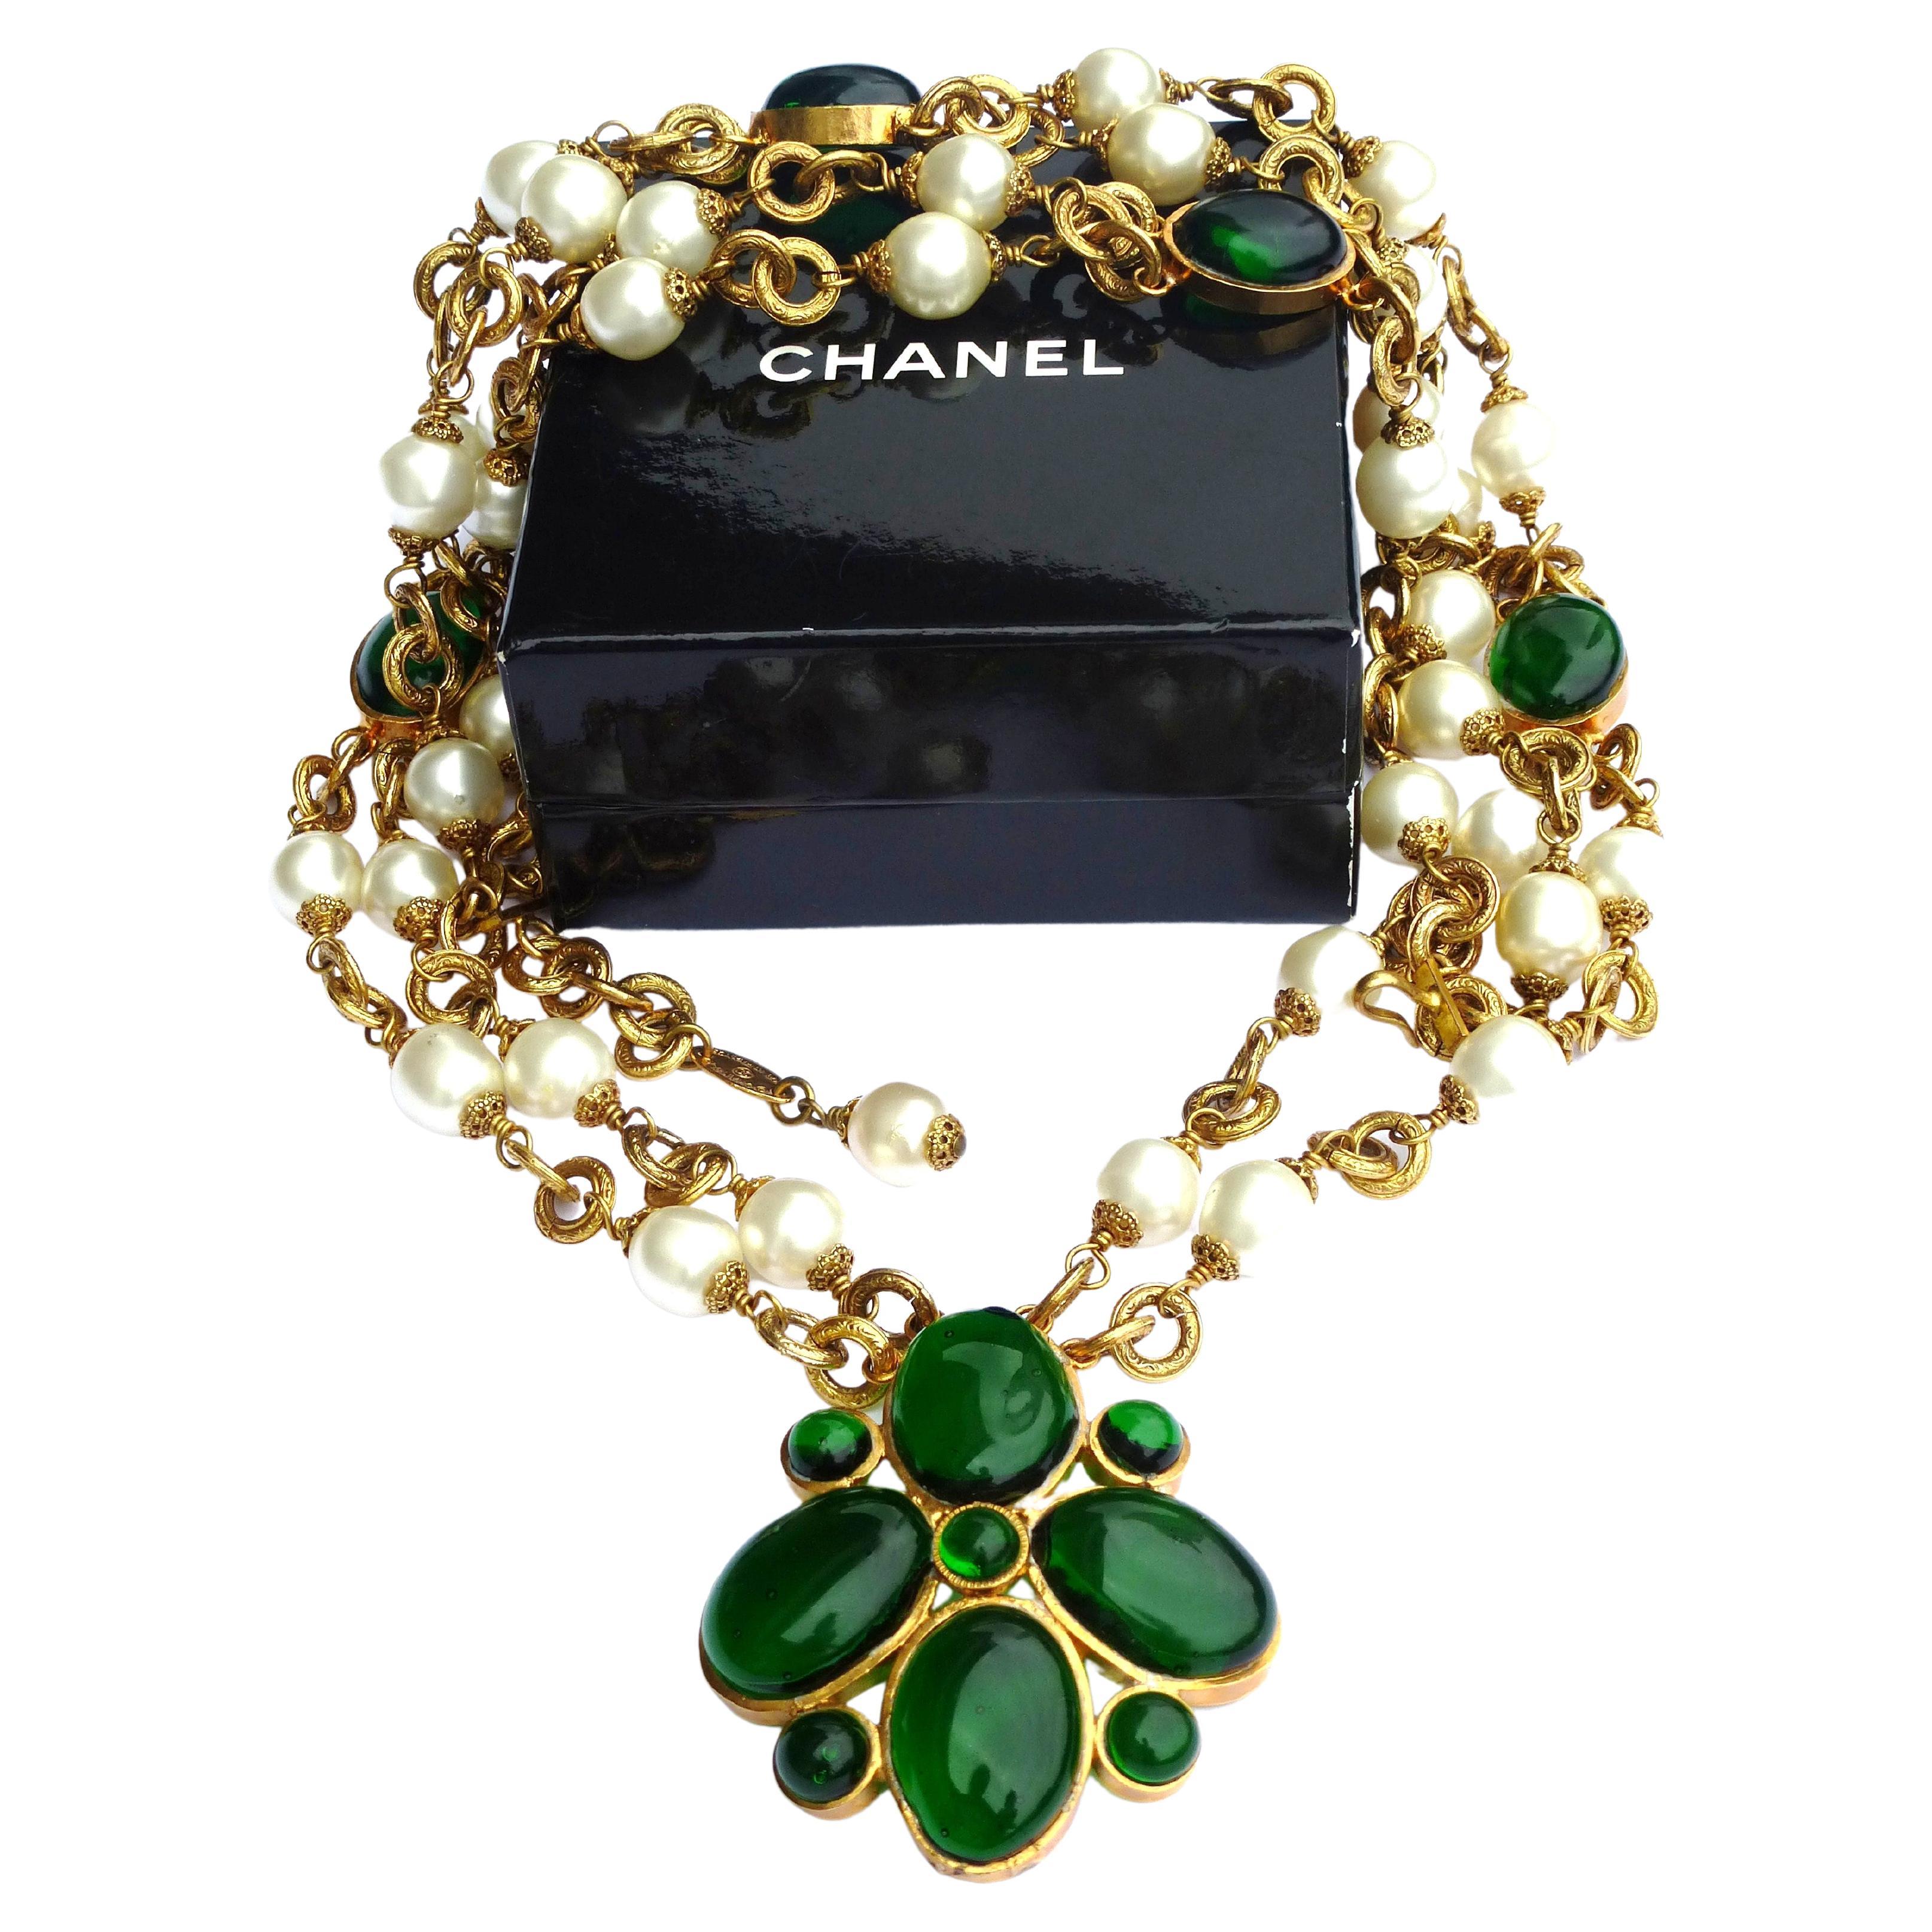 Chanel No5 Pendant - 11 For Sale on 1stDibs  chanel no 5 jewellery, chanel  no 5 pendant